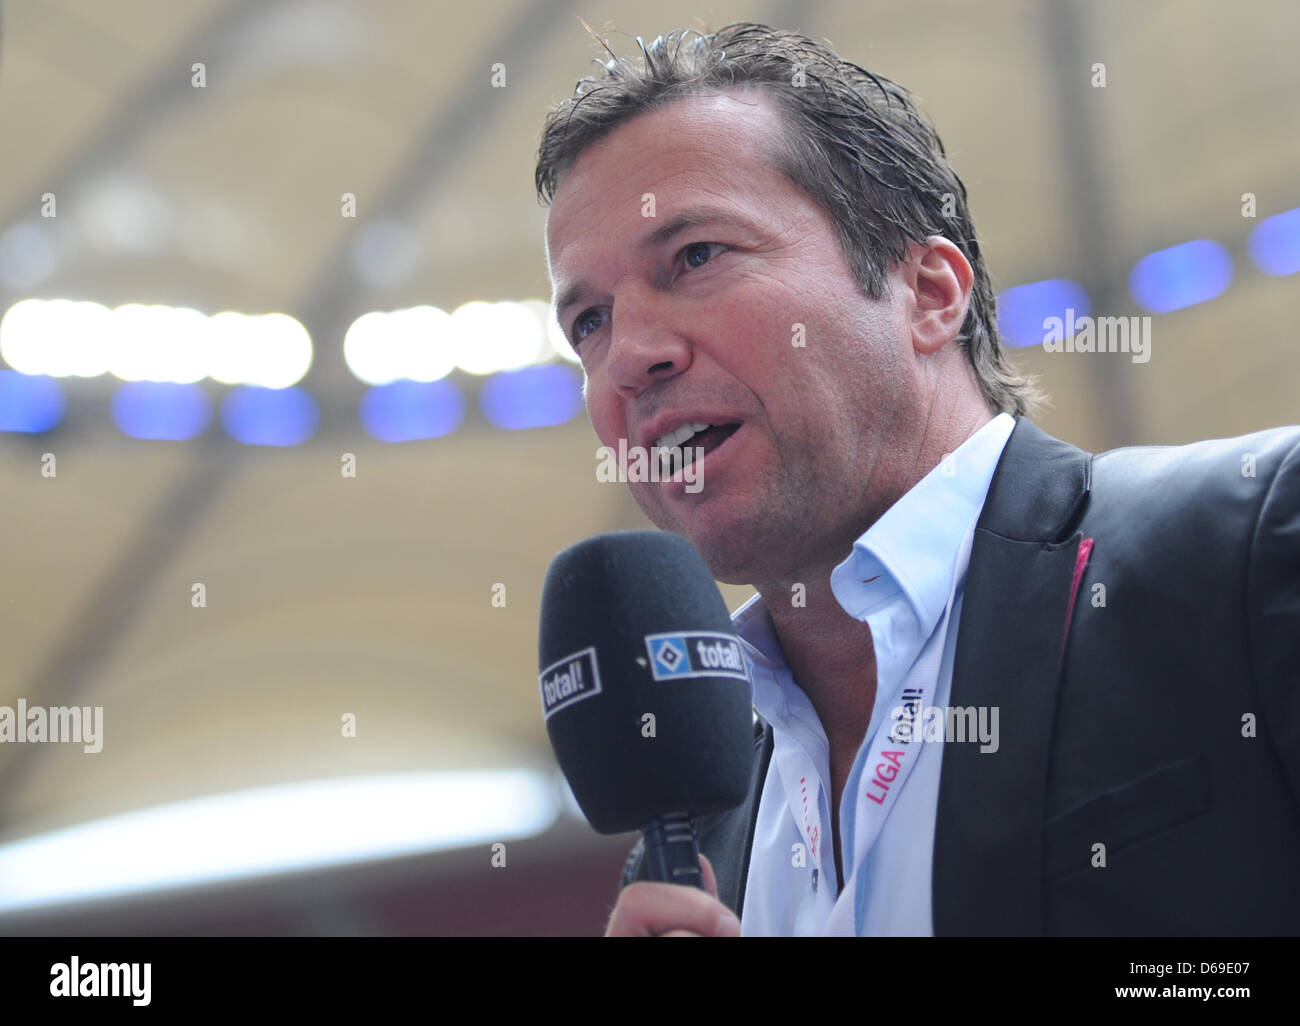 (FILE) An archive photo dated 05 August 2012 shows former soccer pro Lothar Matthaeus giving an interview before the 'Liga total! Cup' match between Hamburg SV and Bayern Munich at Imtech Arena in Hamburg, Germany. Matthaeus will be a television expert. The 1990 world champion soccer player will appear regularly for the top matches of the week on Saturday evening for Sky, according Stock Photo